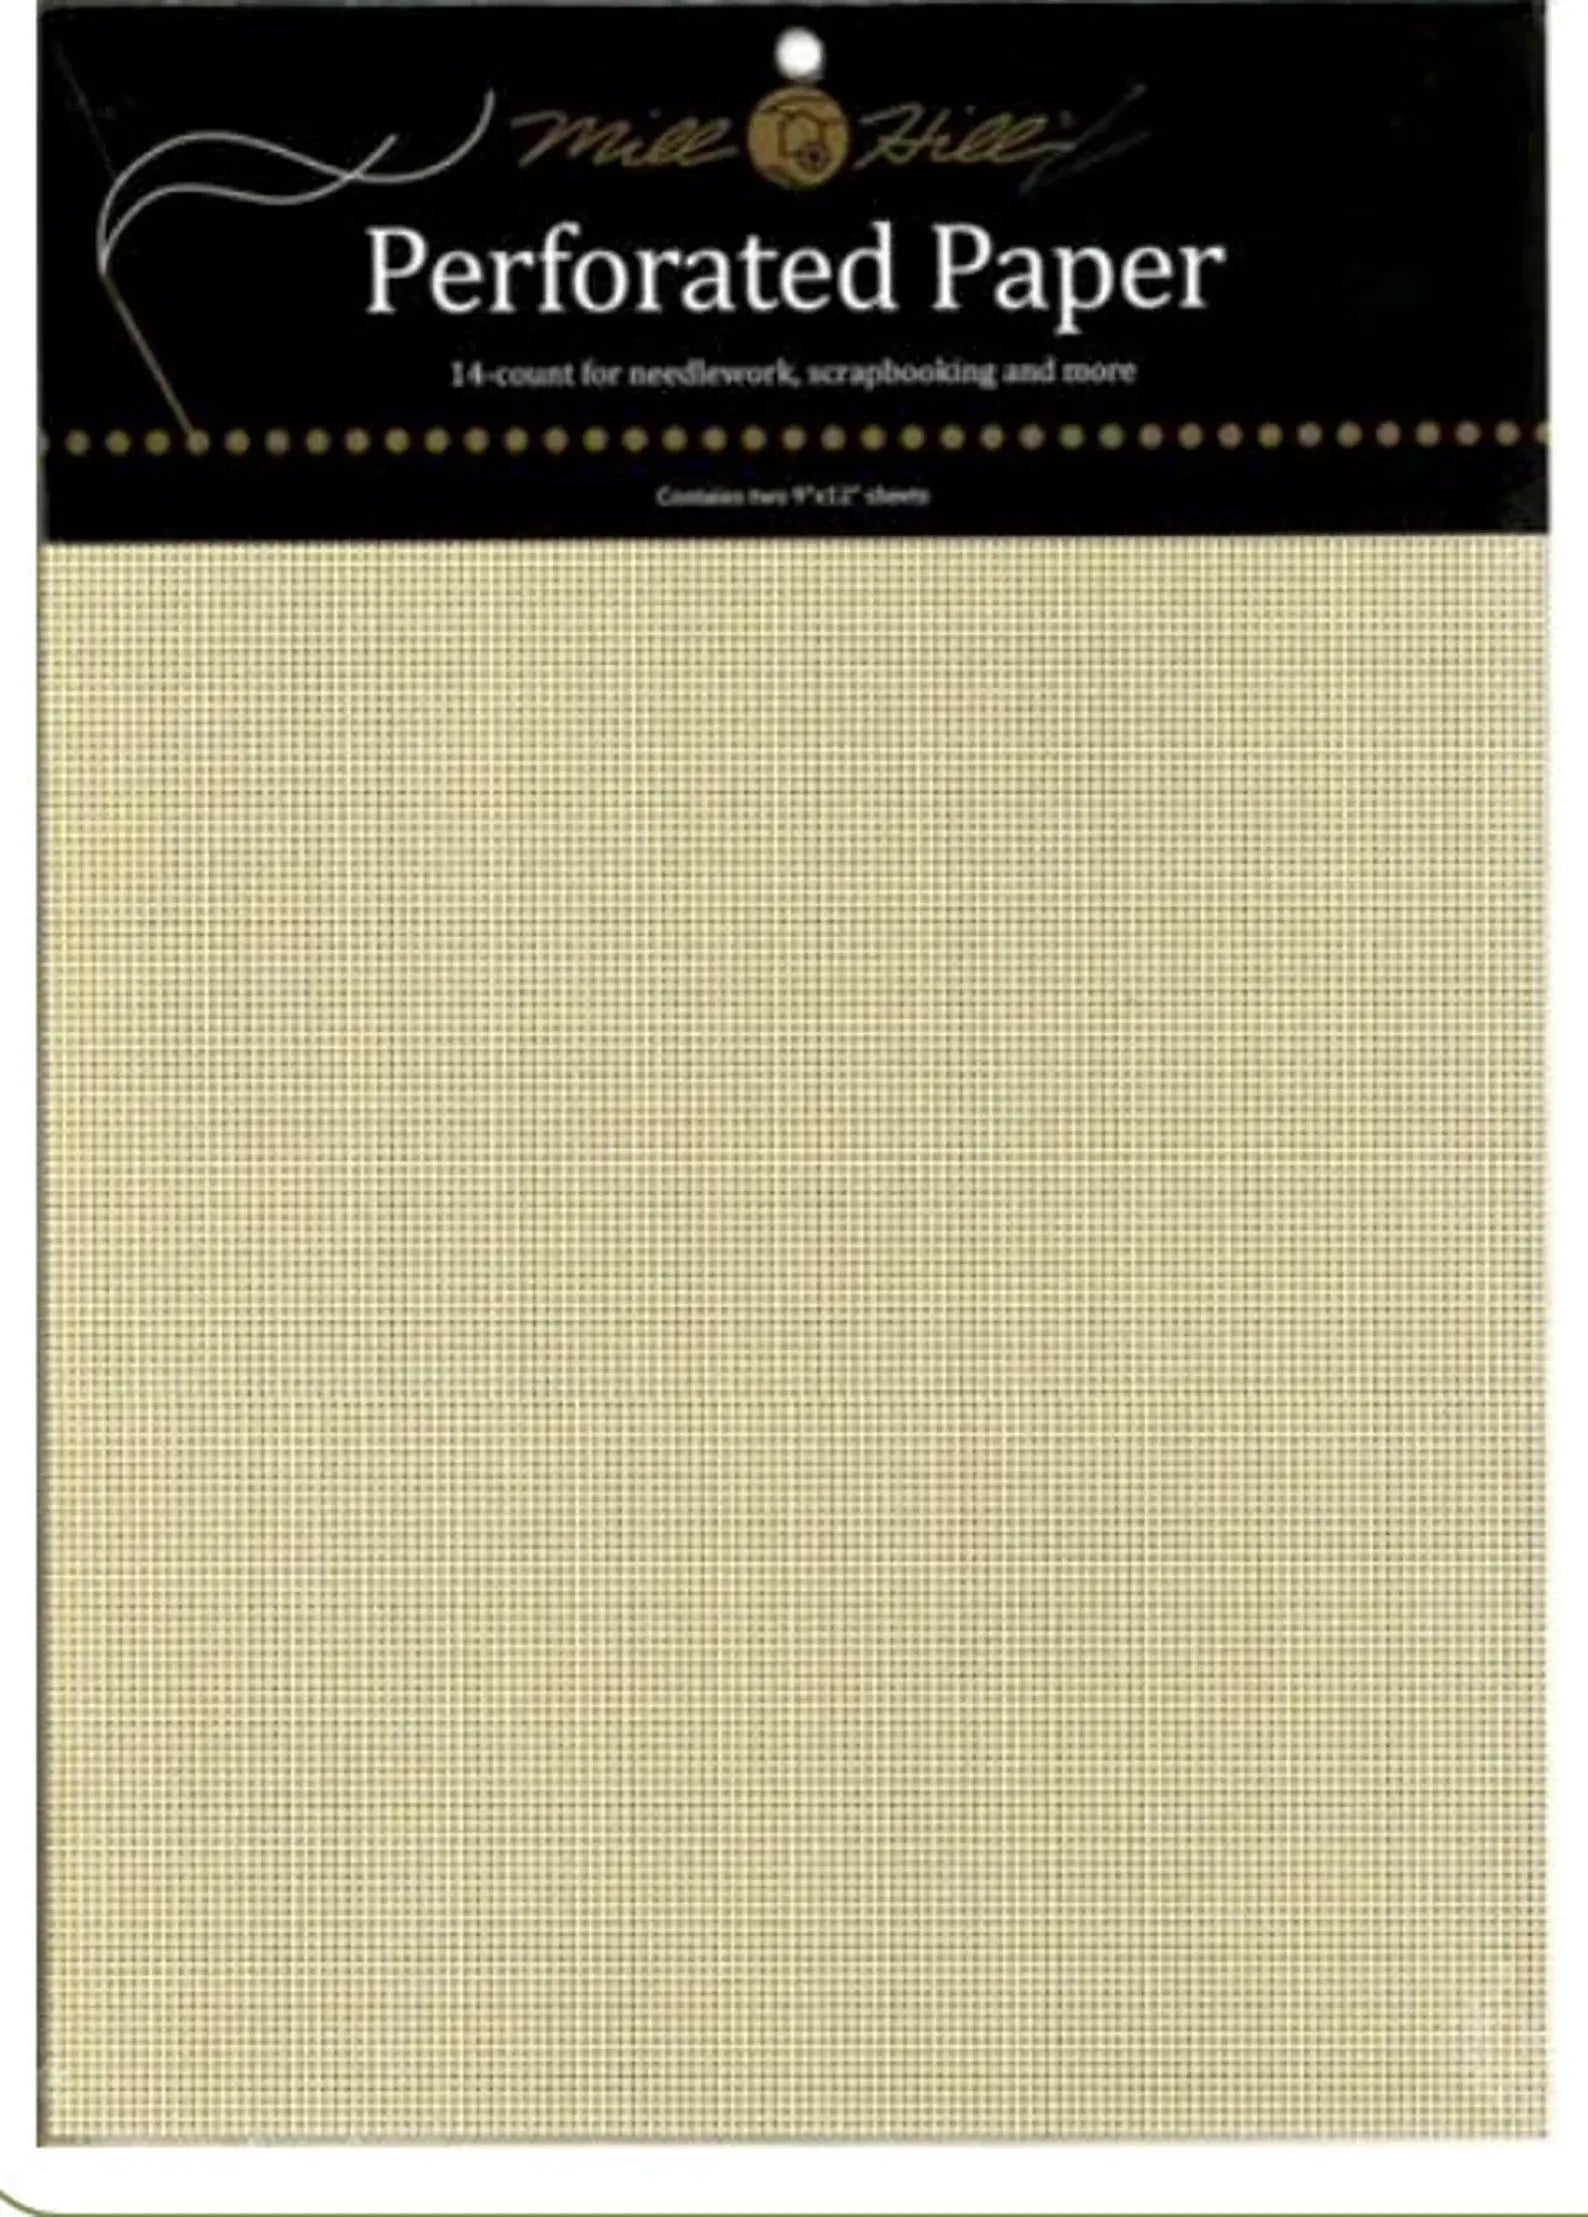 A Perforated-Paper Needle Book to Cross-Stitch Pattern – Long Thread Media